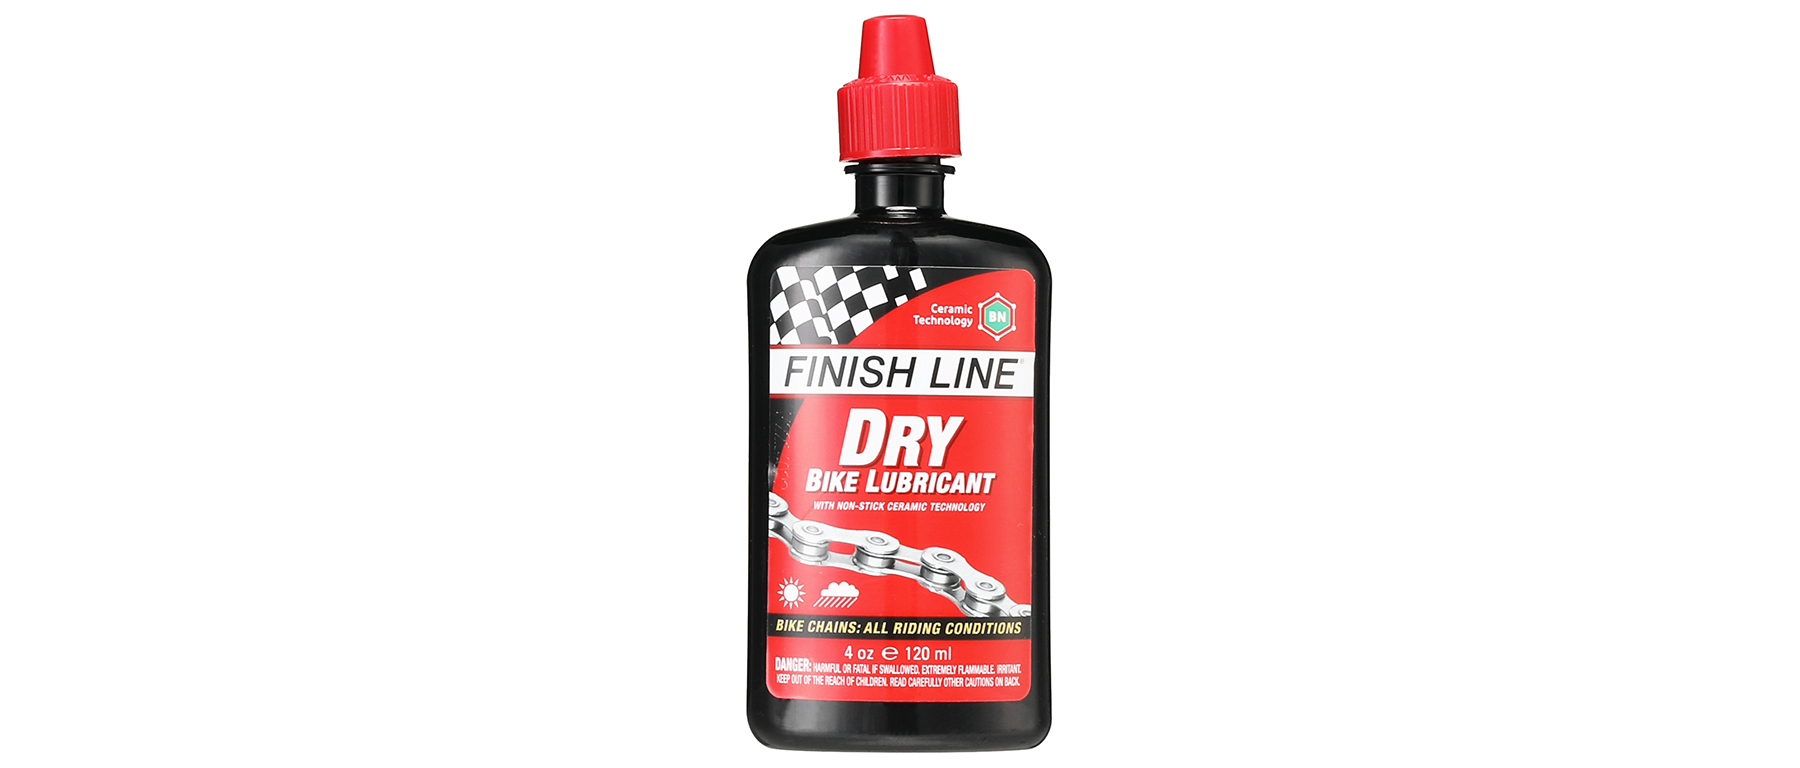 Finish Line Dry Lube with Ceramic Technology